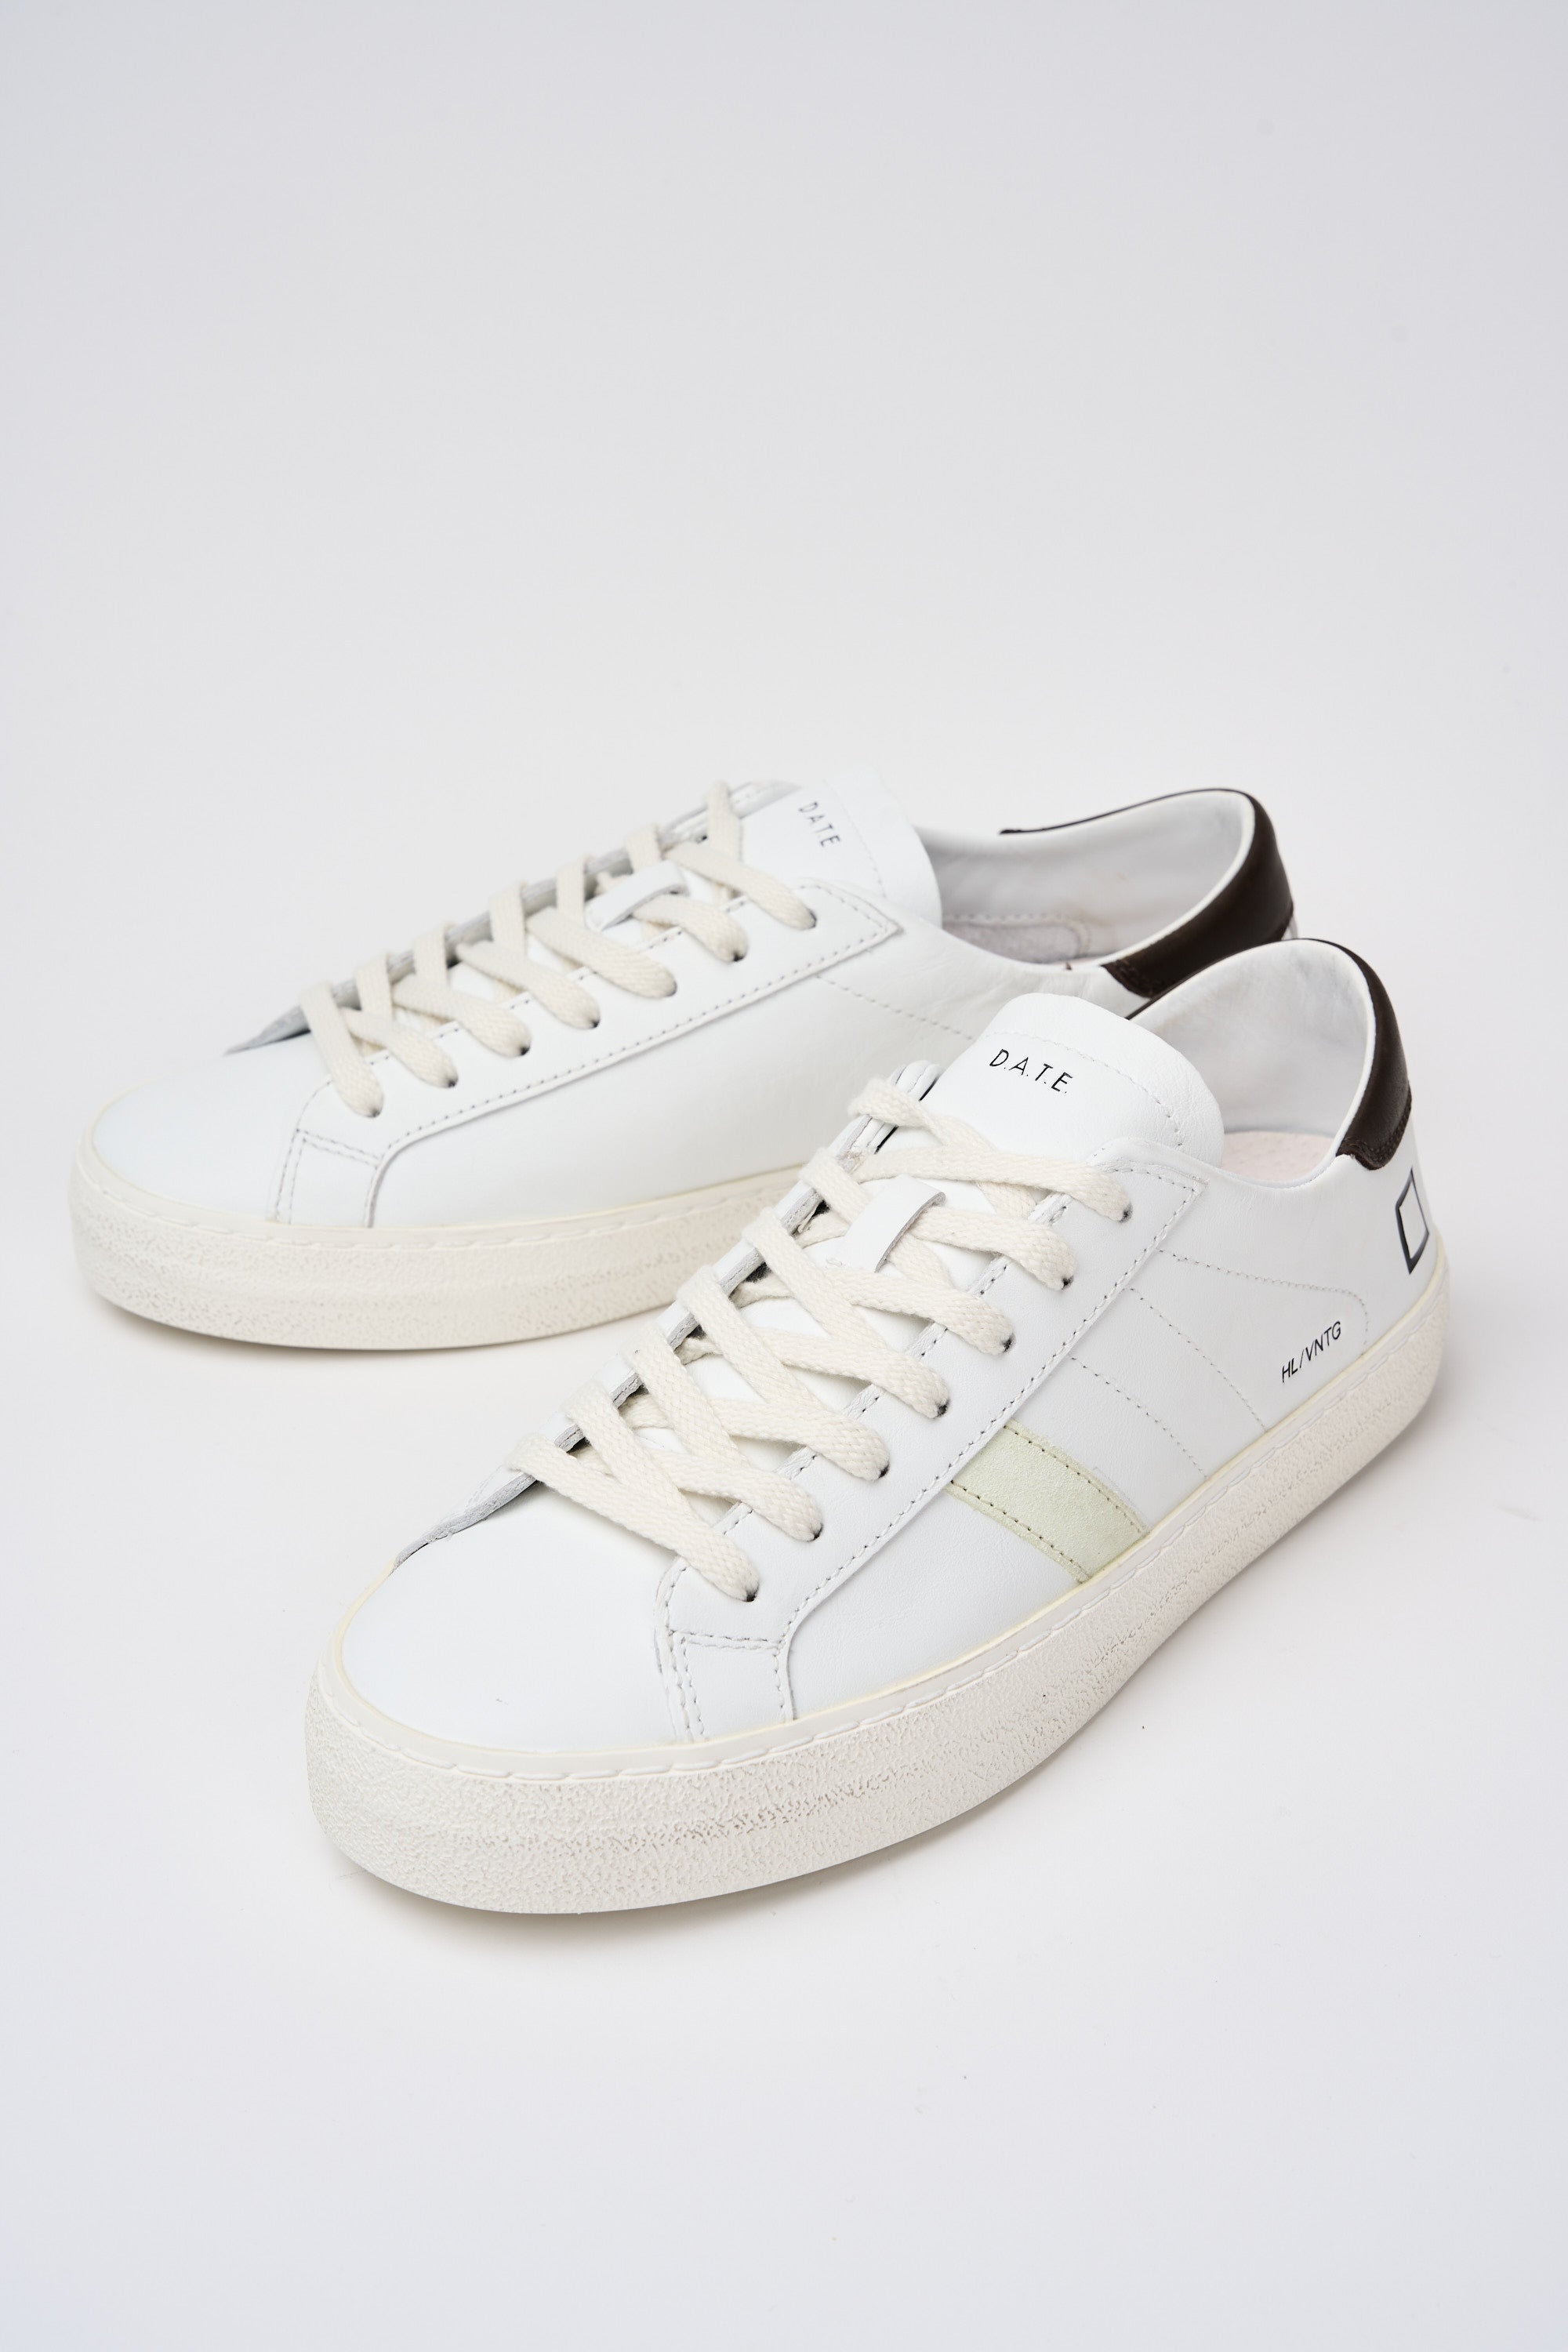 D.A.T.E. Sneakers Hill Low Vintage White/Dark Brown Leather-7